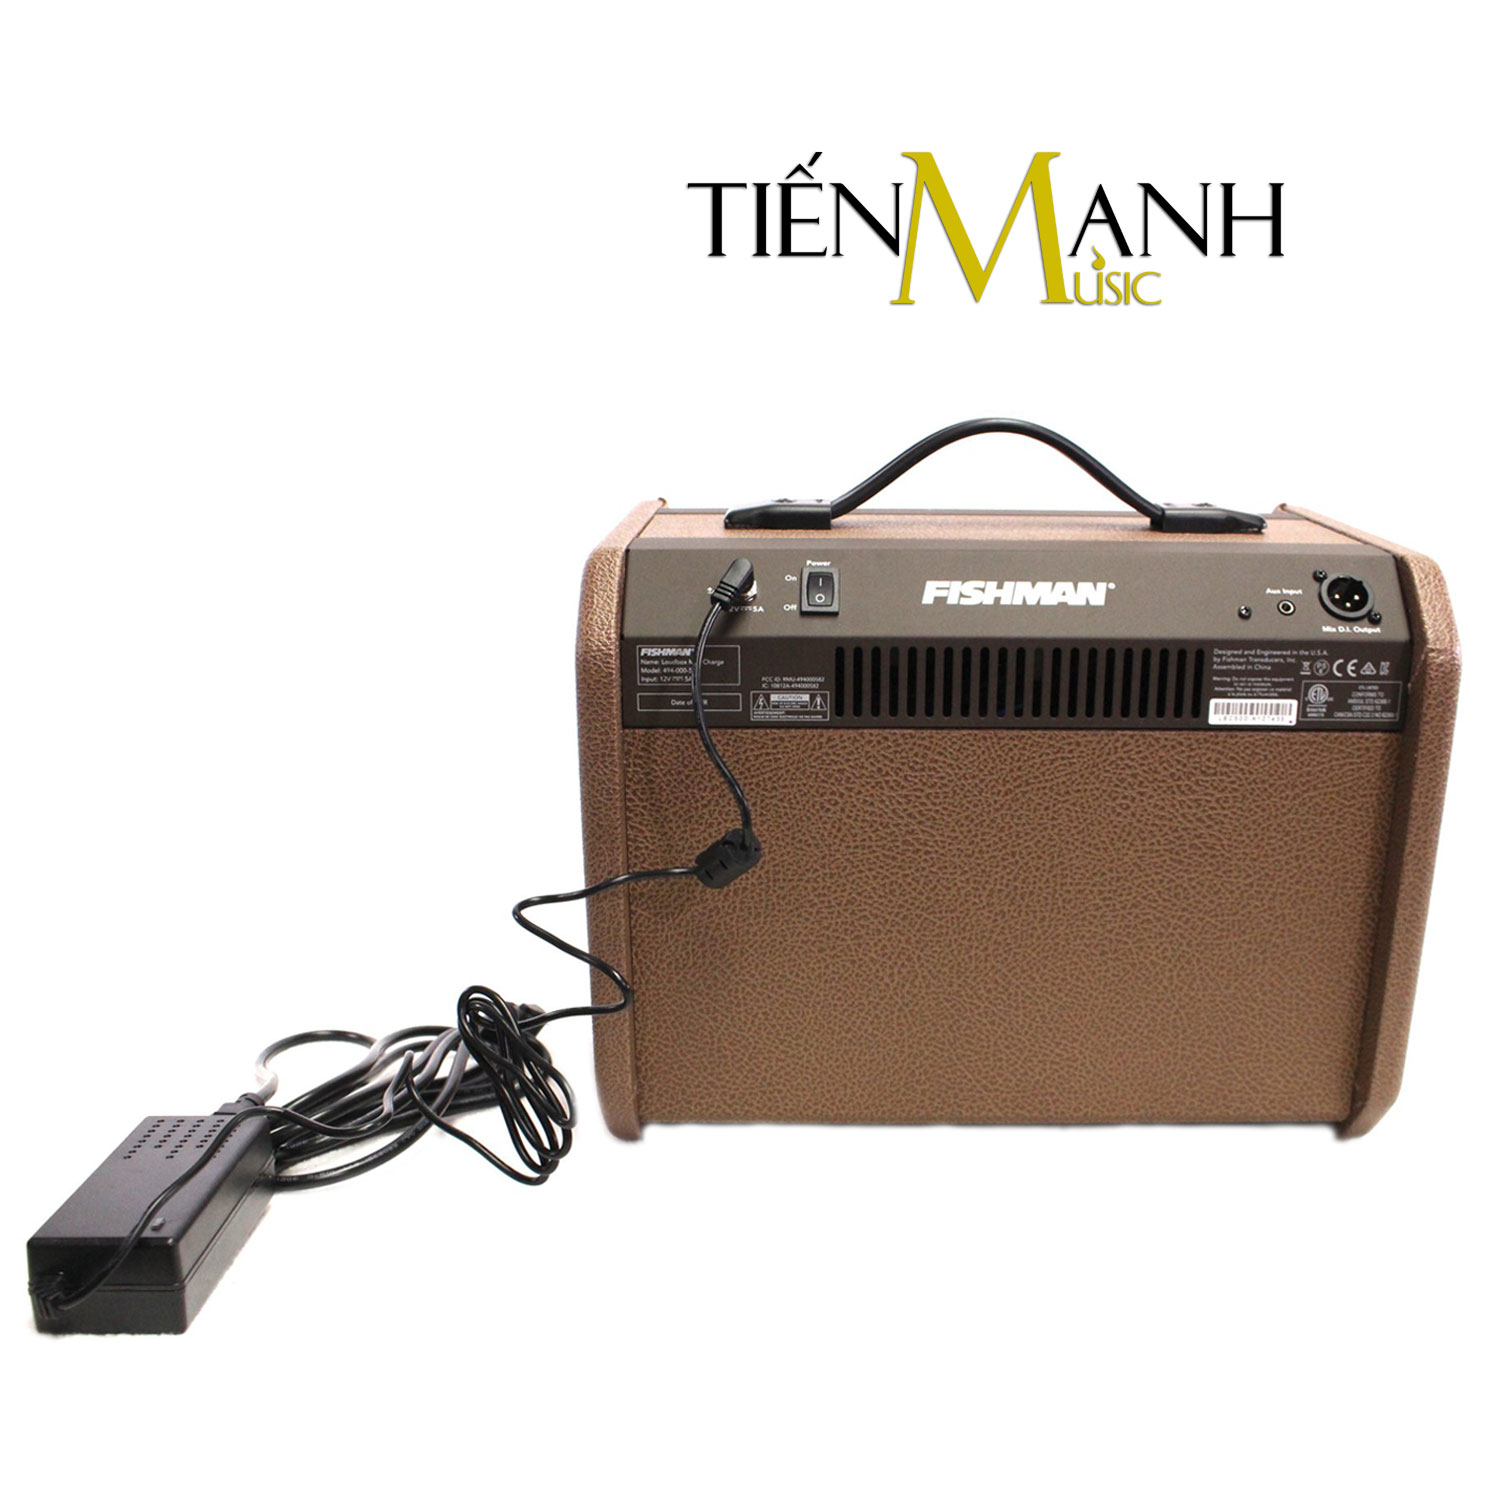 Cach_su_dung_Fishman_Loudbox_Mini_Charge_60W_Battery_Powered_Acoustic_Guitar_Amplifier.jpg